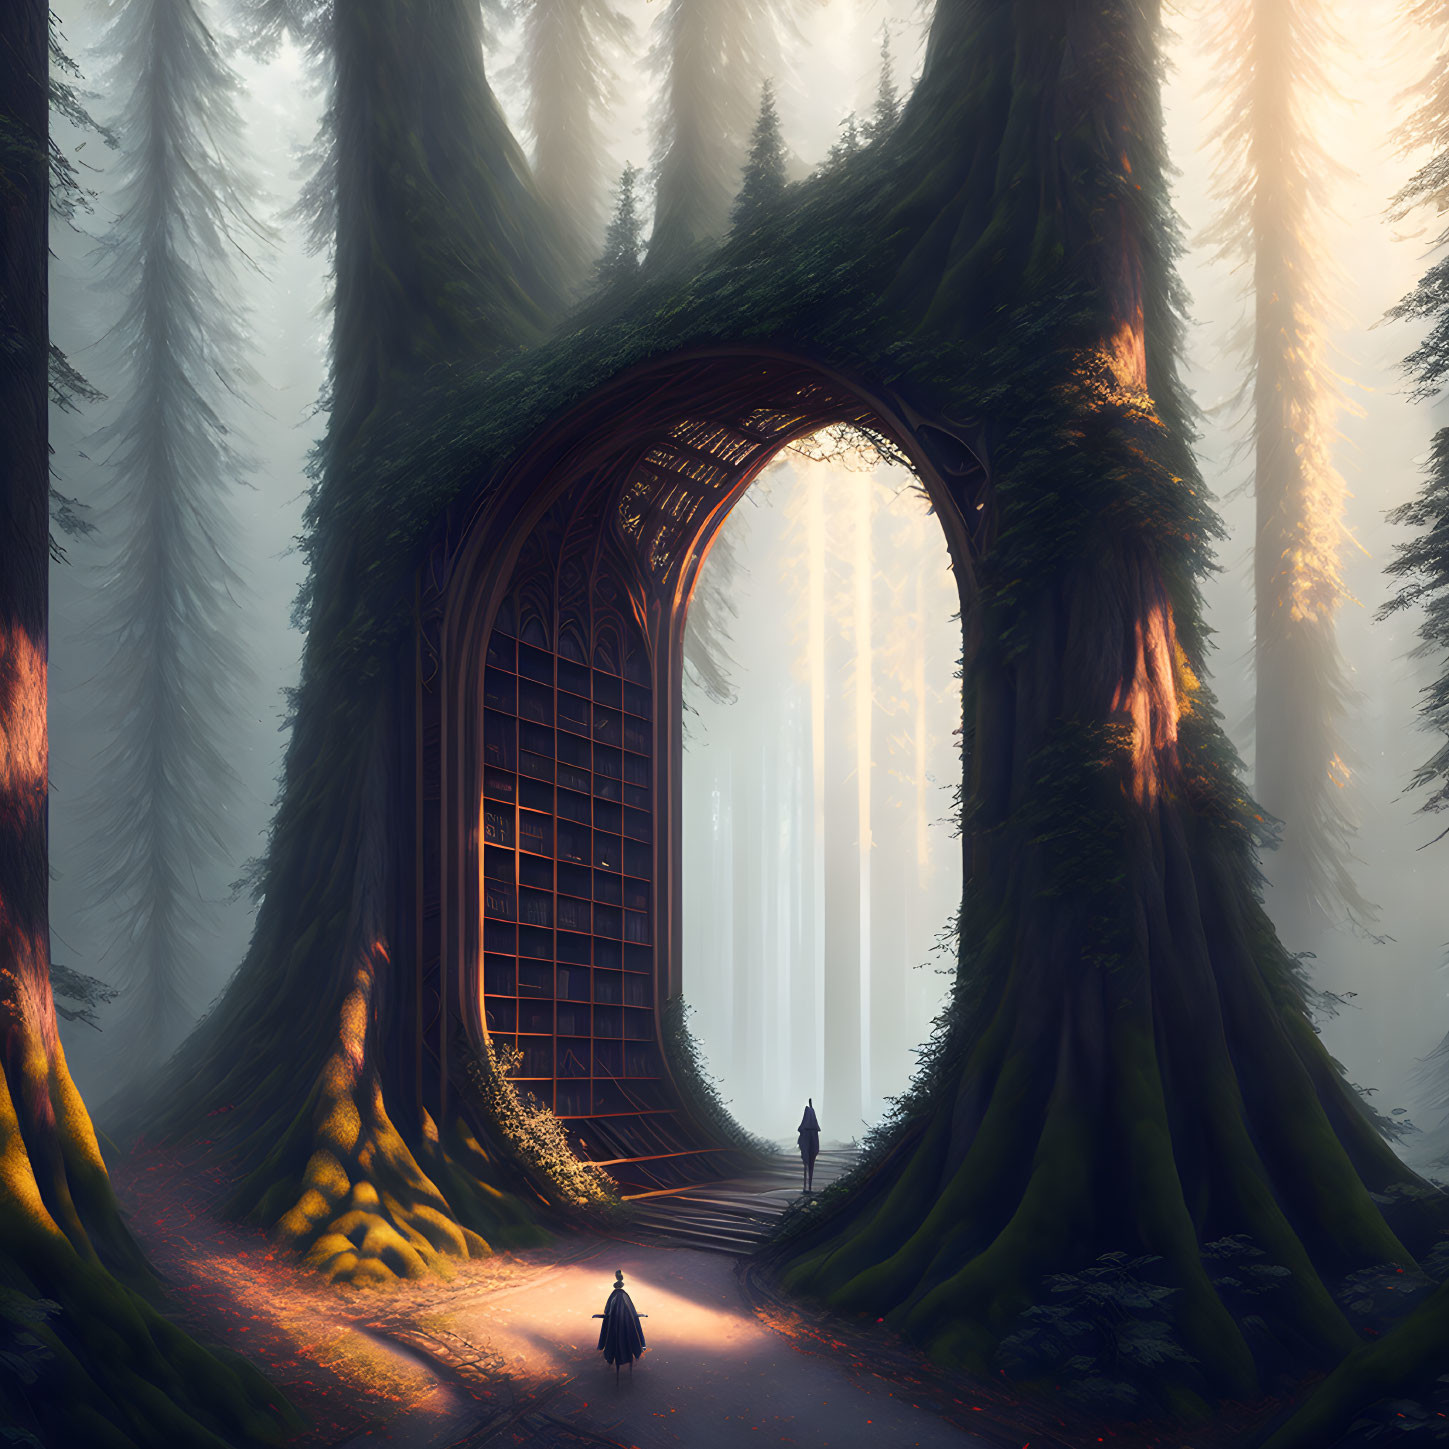 Ethereal forest scene with natural tree archway and two figures